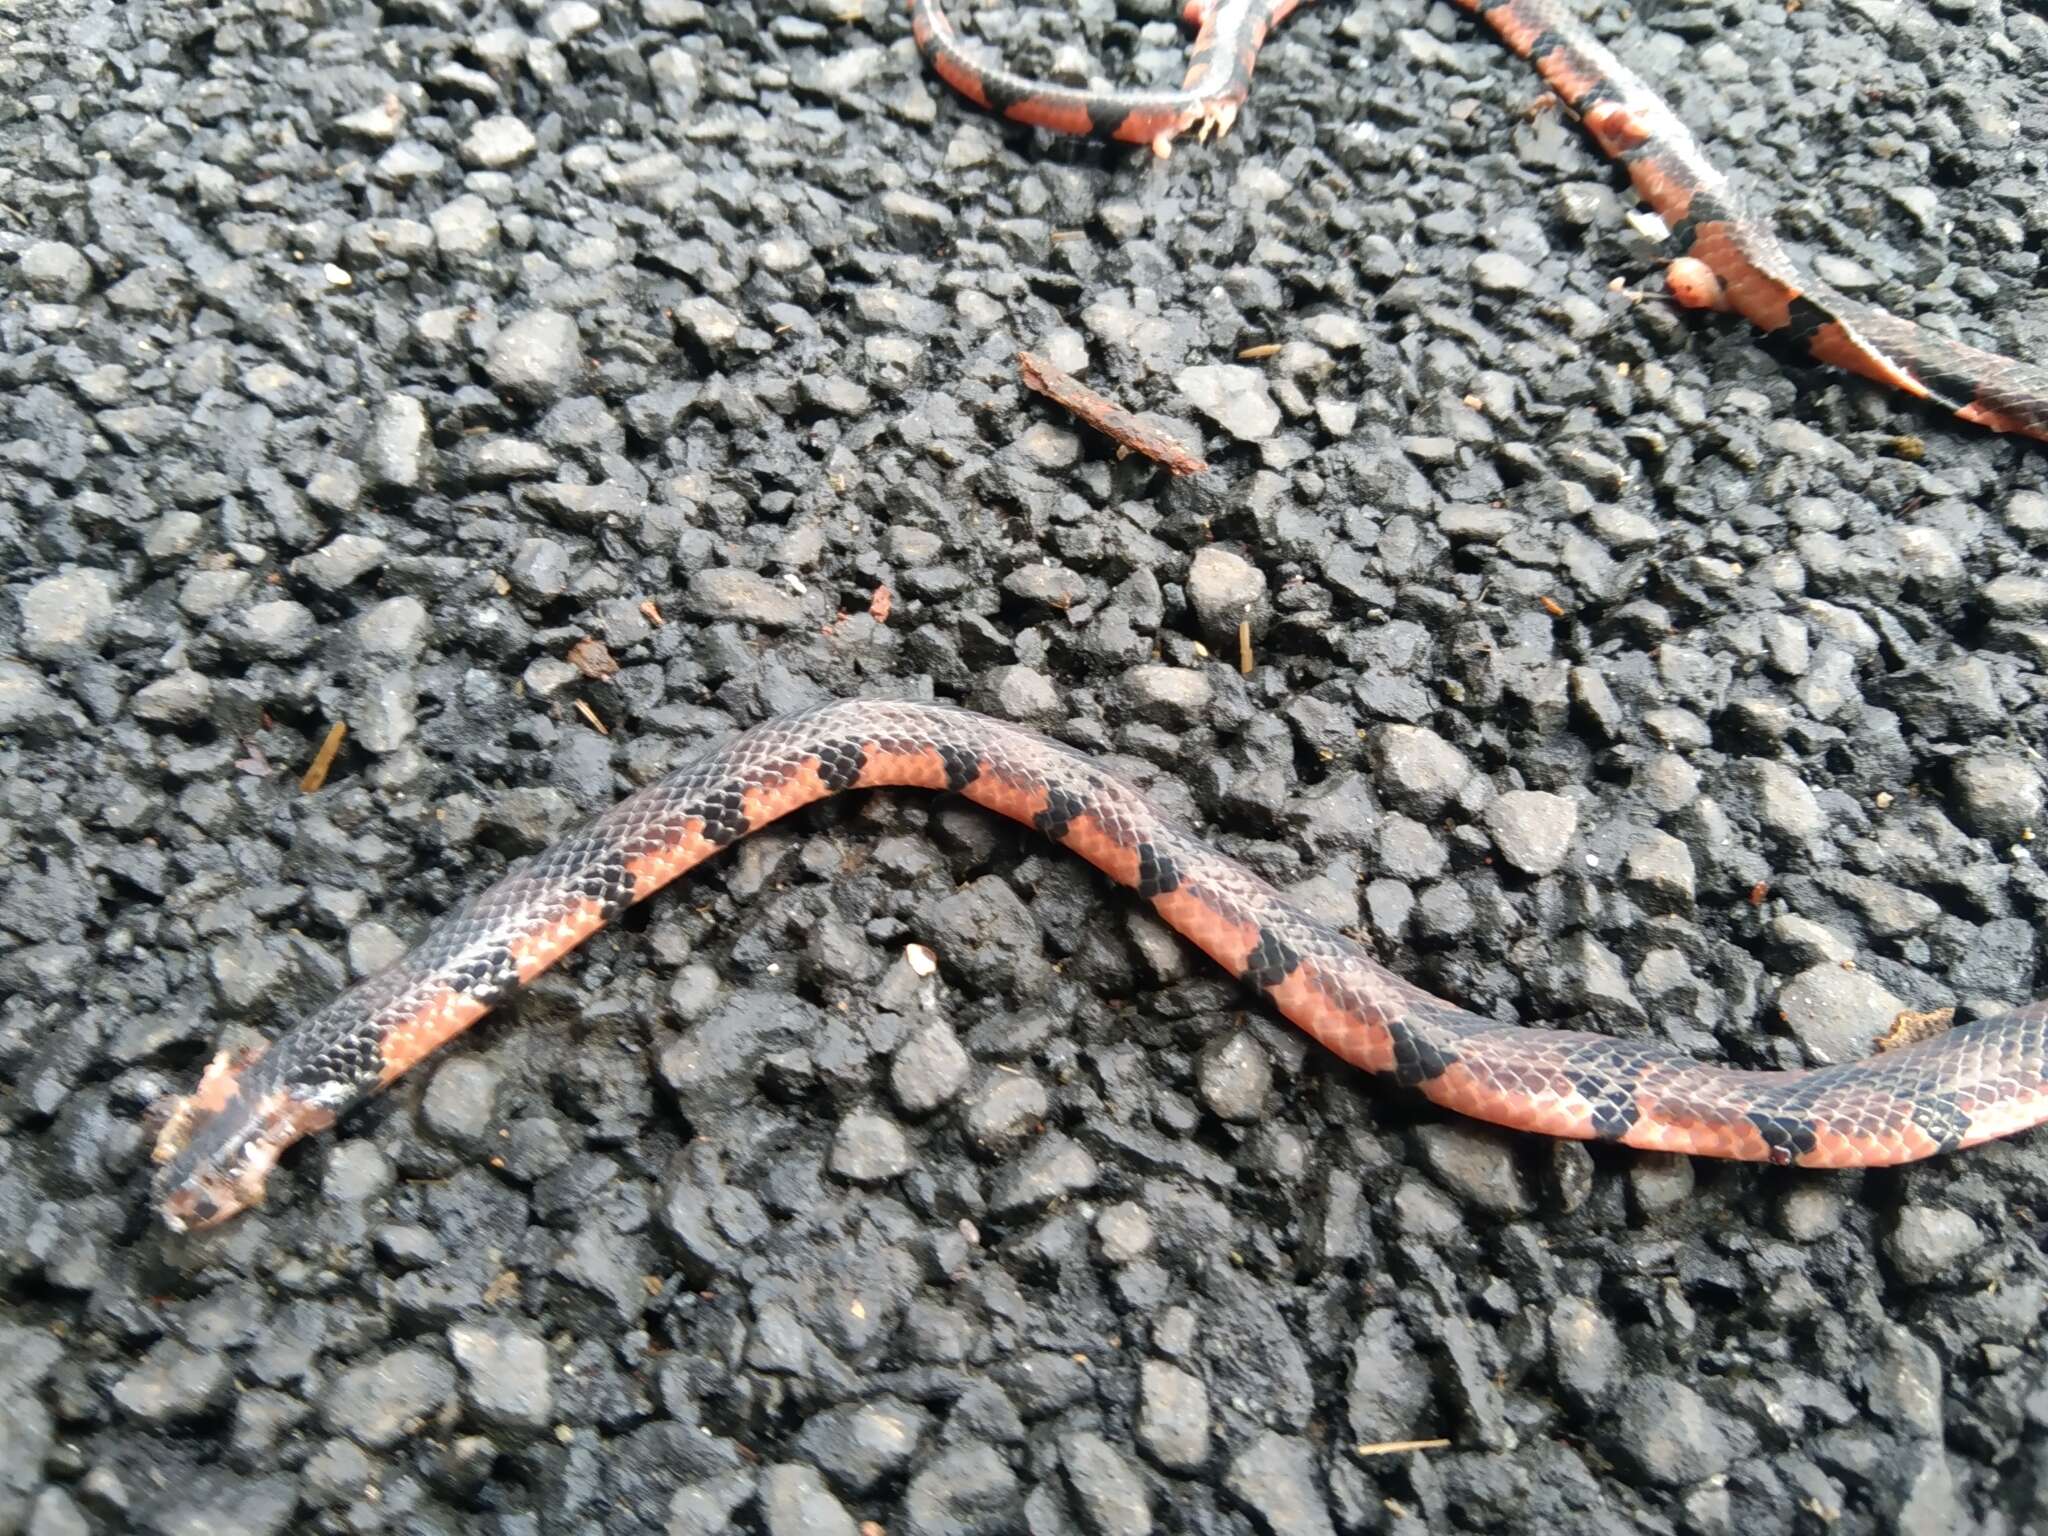 Image of Bibron's Coral Snake